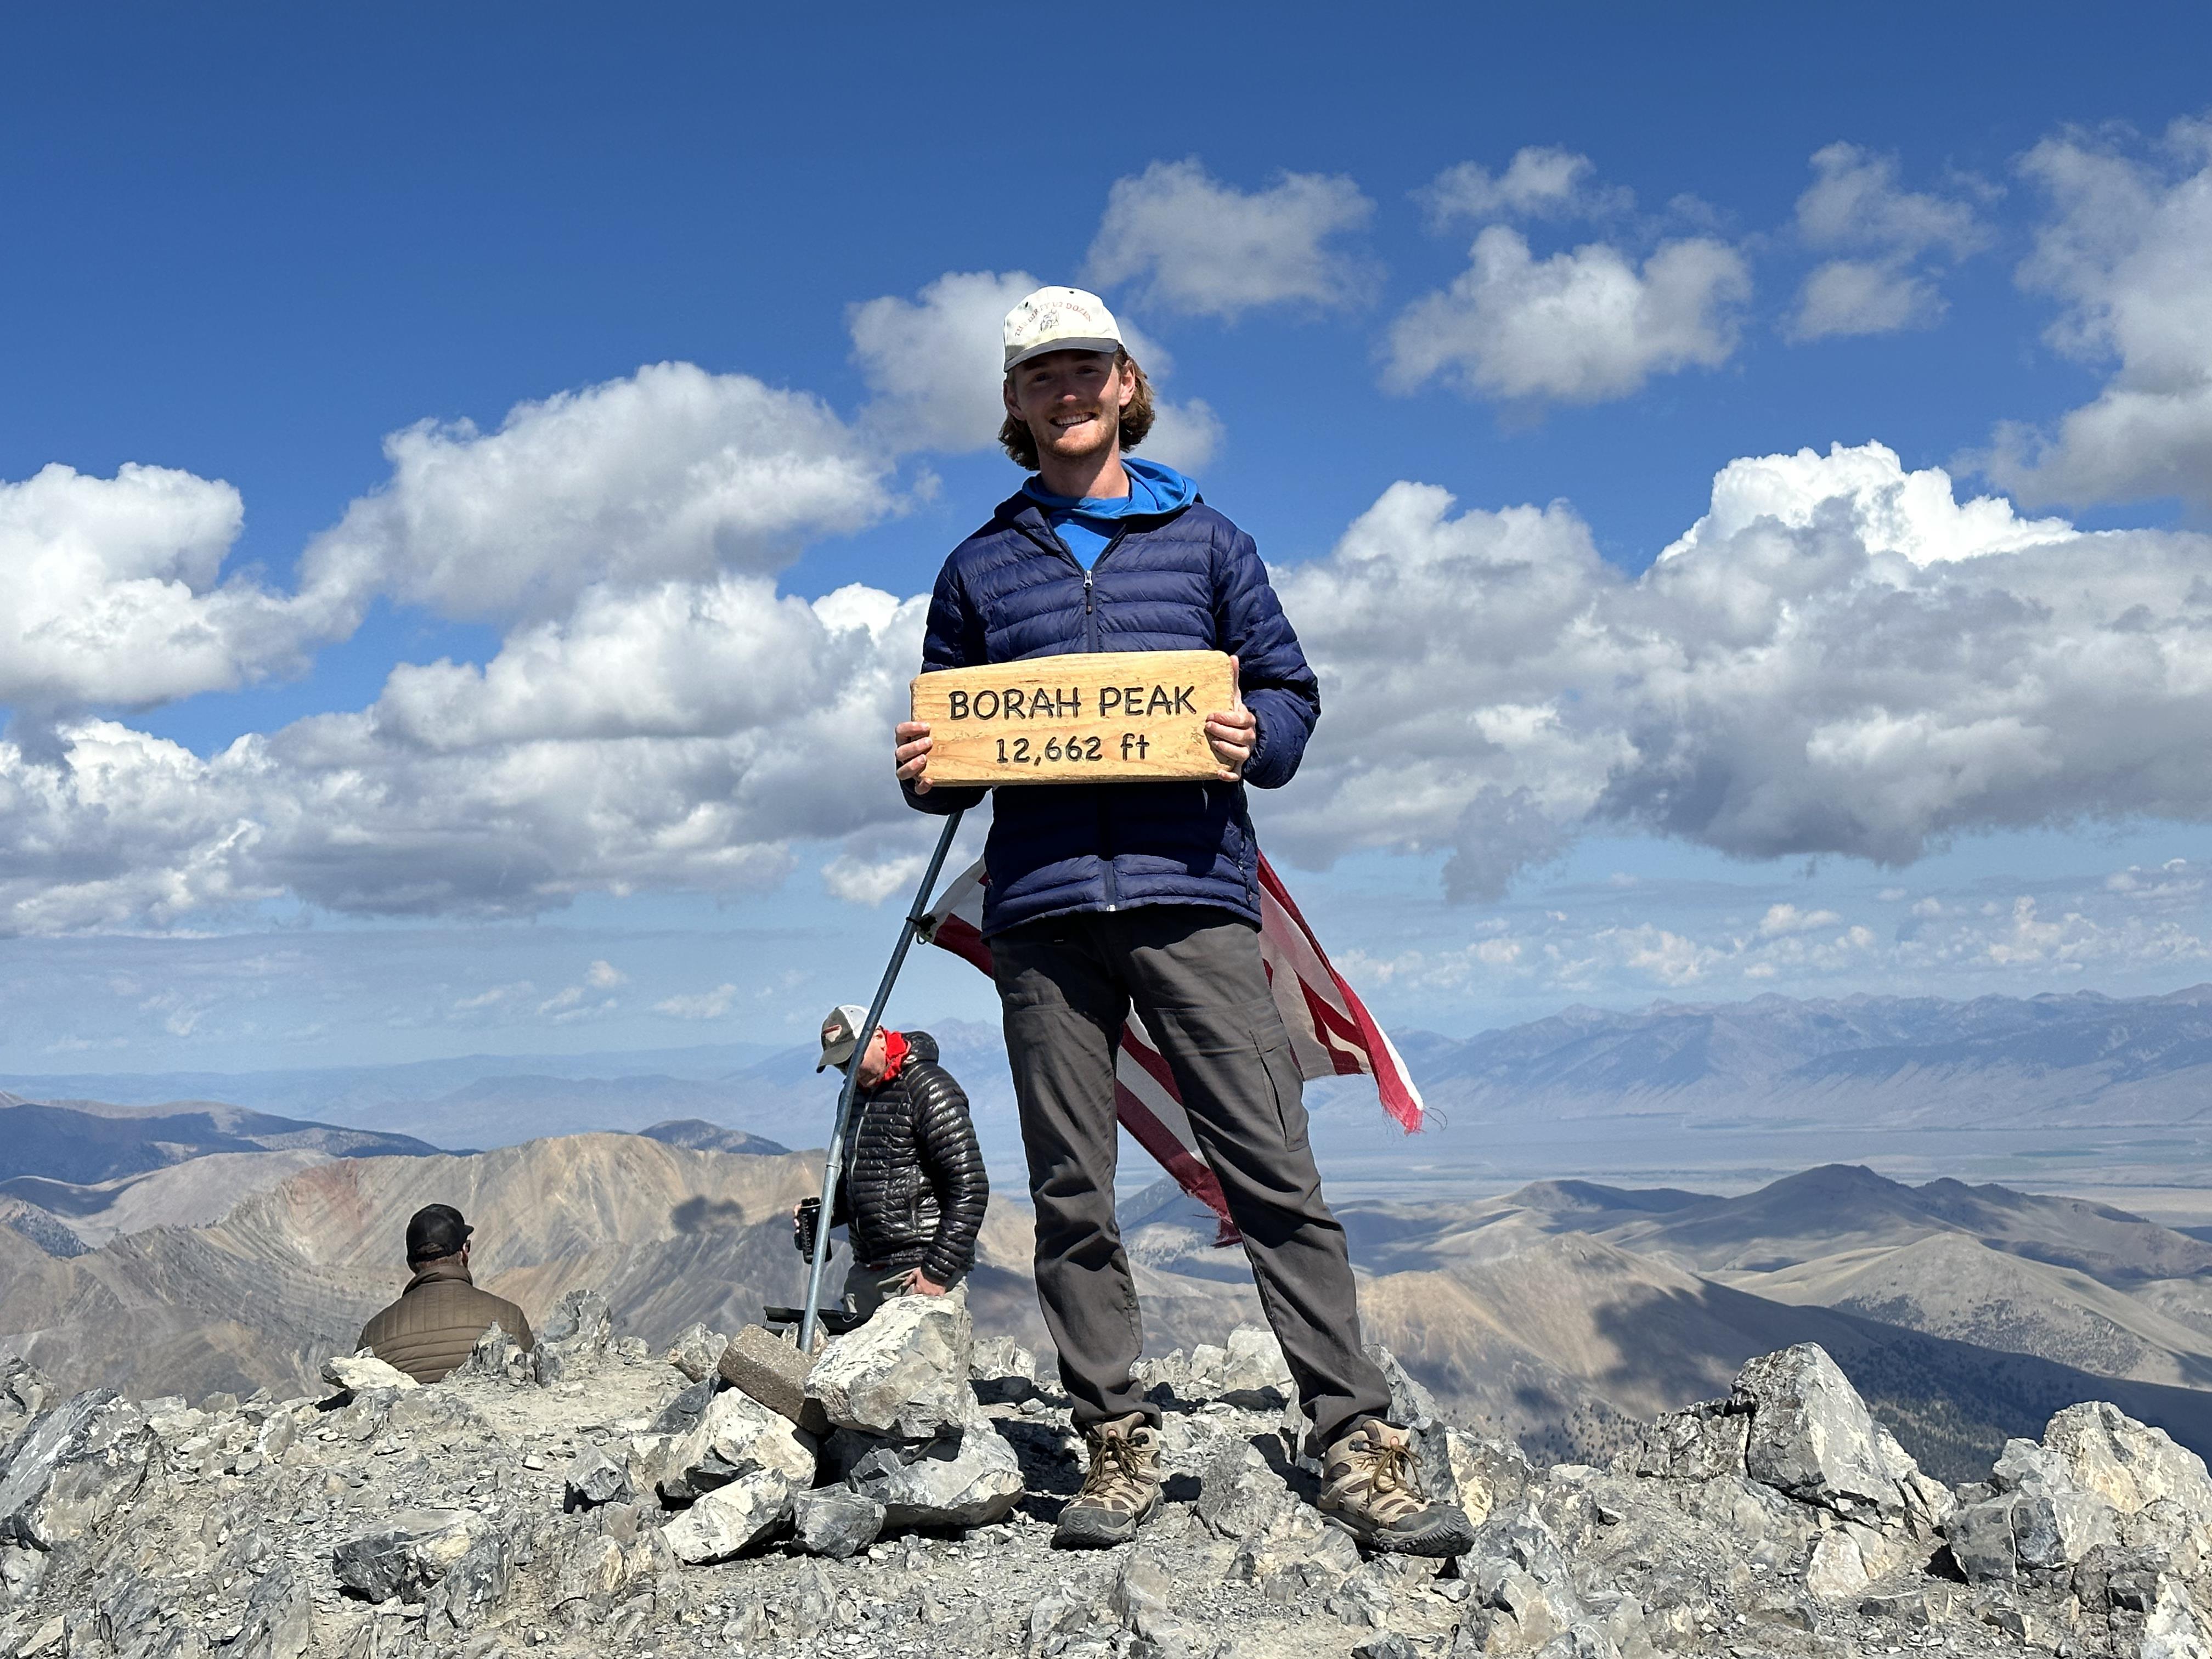 Man in puffy coat and baseball cap standing on rocky mountain summit and holding a sign that says "Borah Peak 12,662 ft."